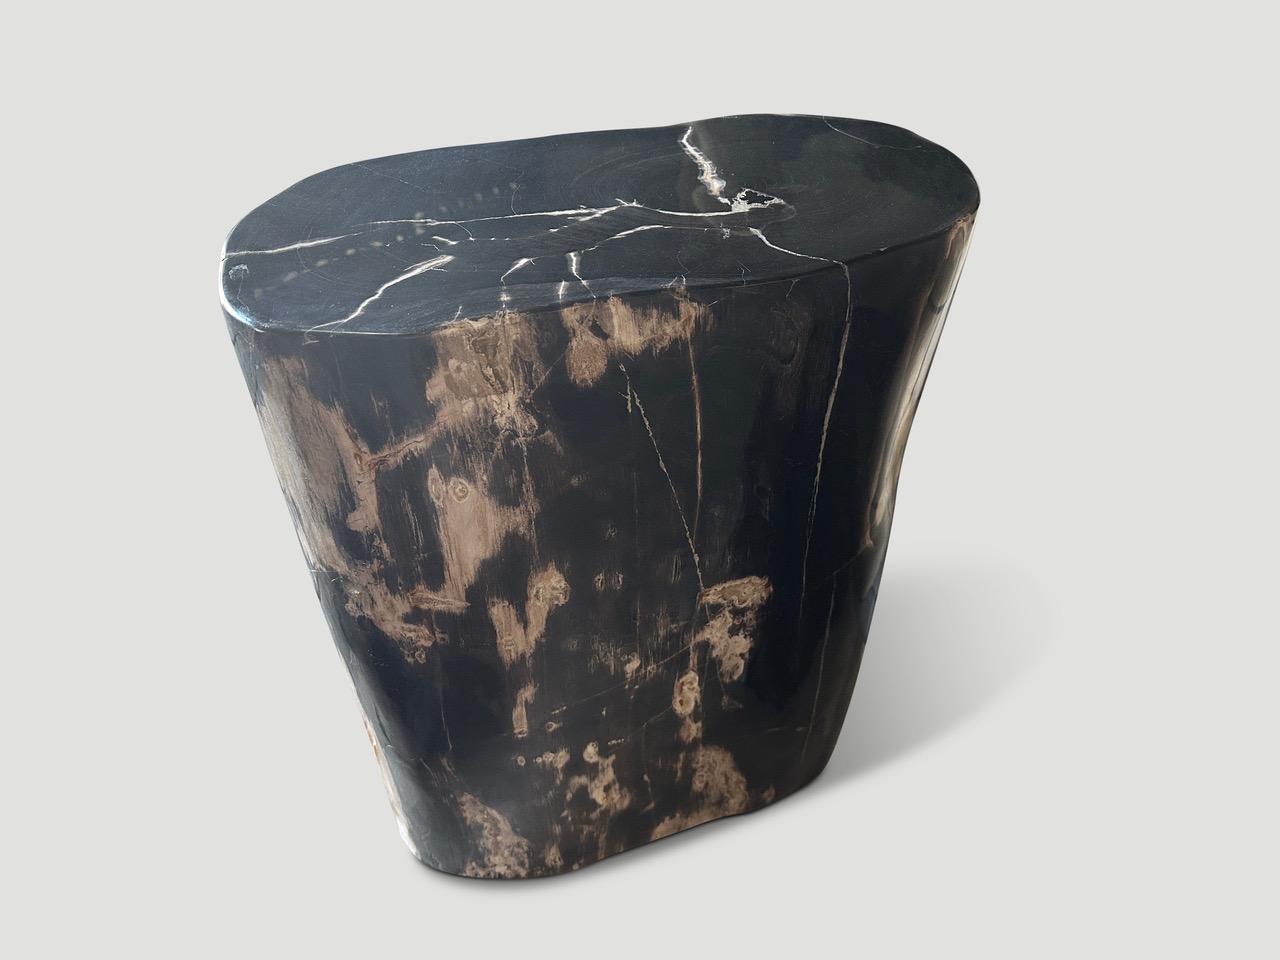 Organic Modern Andrianna Shamaris Super Smooth High Quality Pedestal or Tall Side Table For Sale